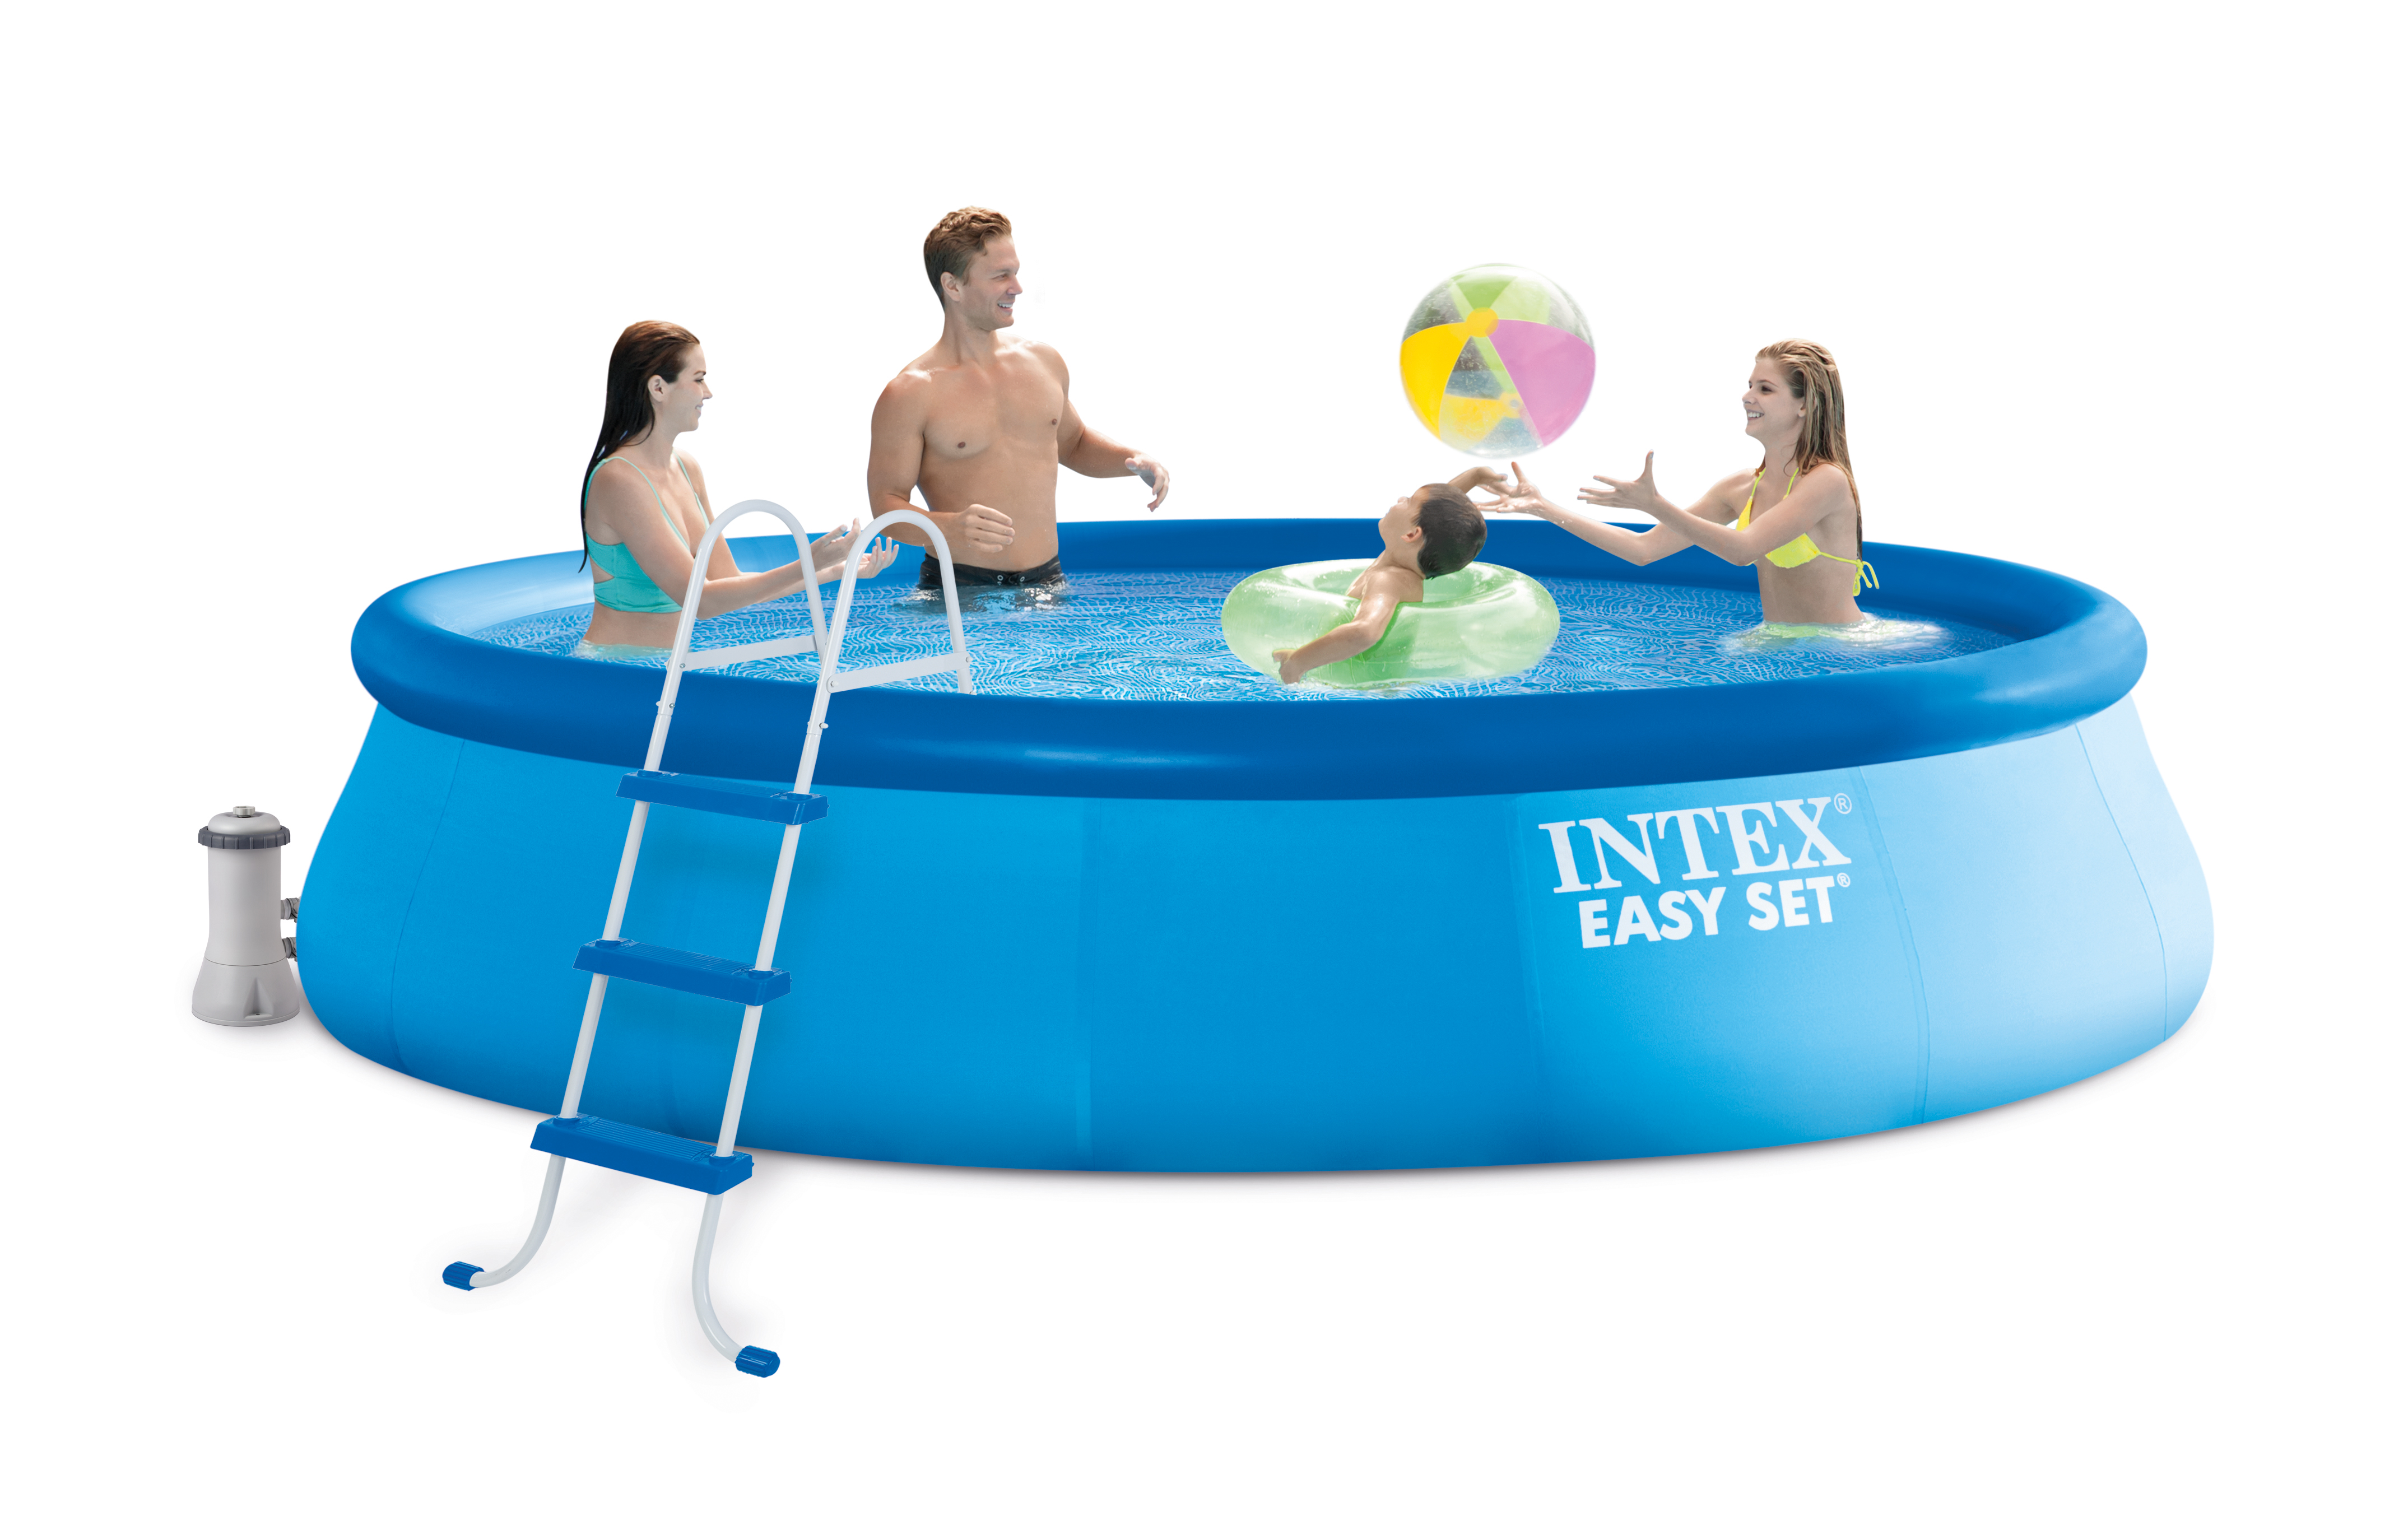 15 foot inflatable pool